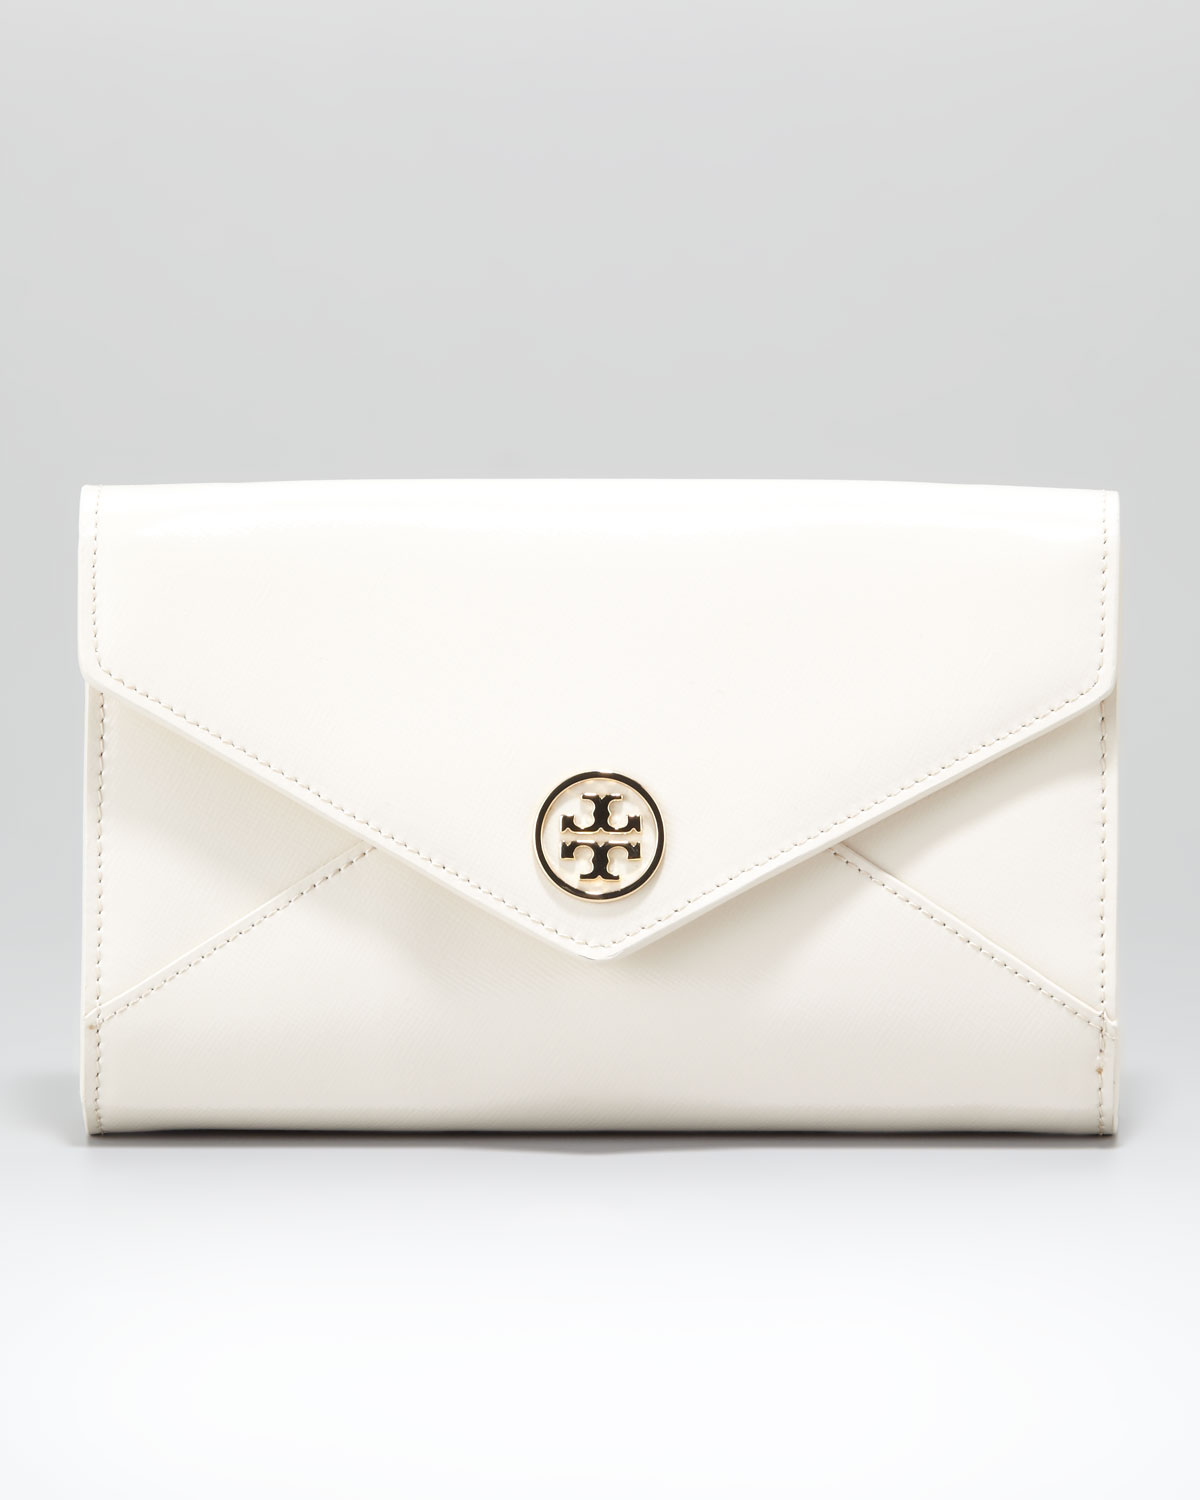 Tory burch Robinson Envelope Clutch Bag Small in White | Lyst